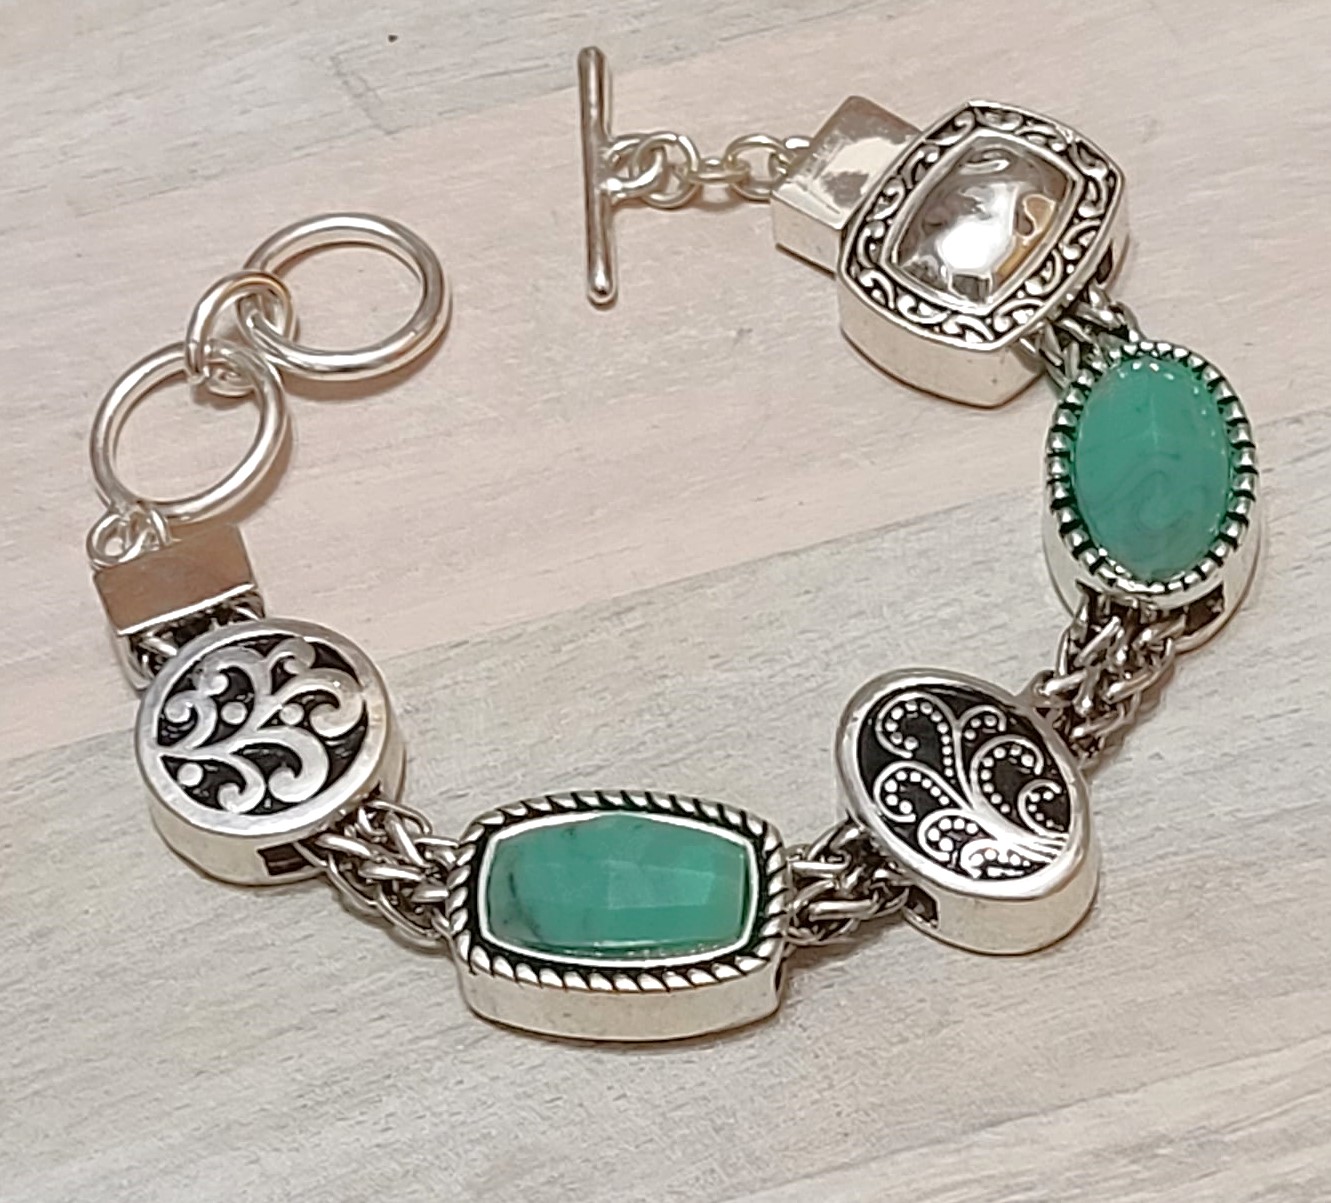 Slide charm bracelet, fashion turquoise cabachons in silver tone, costume